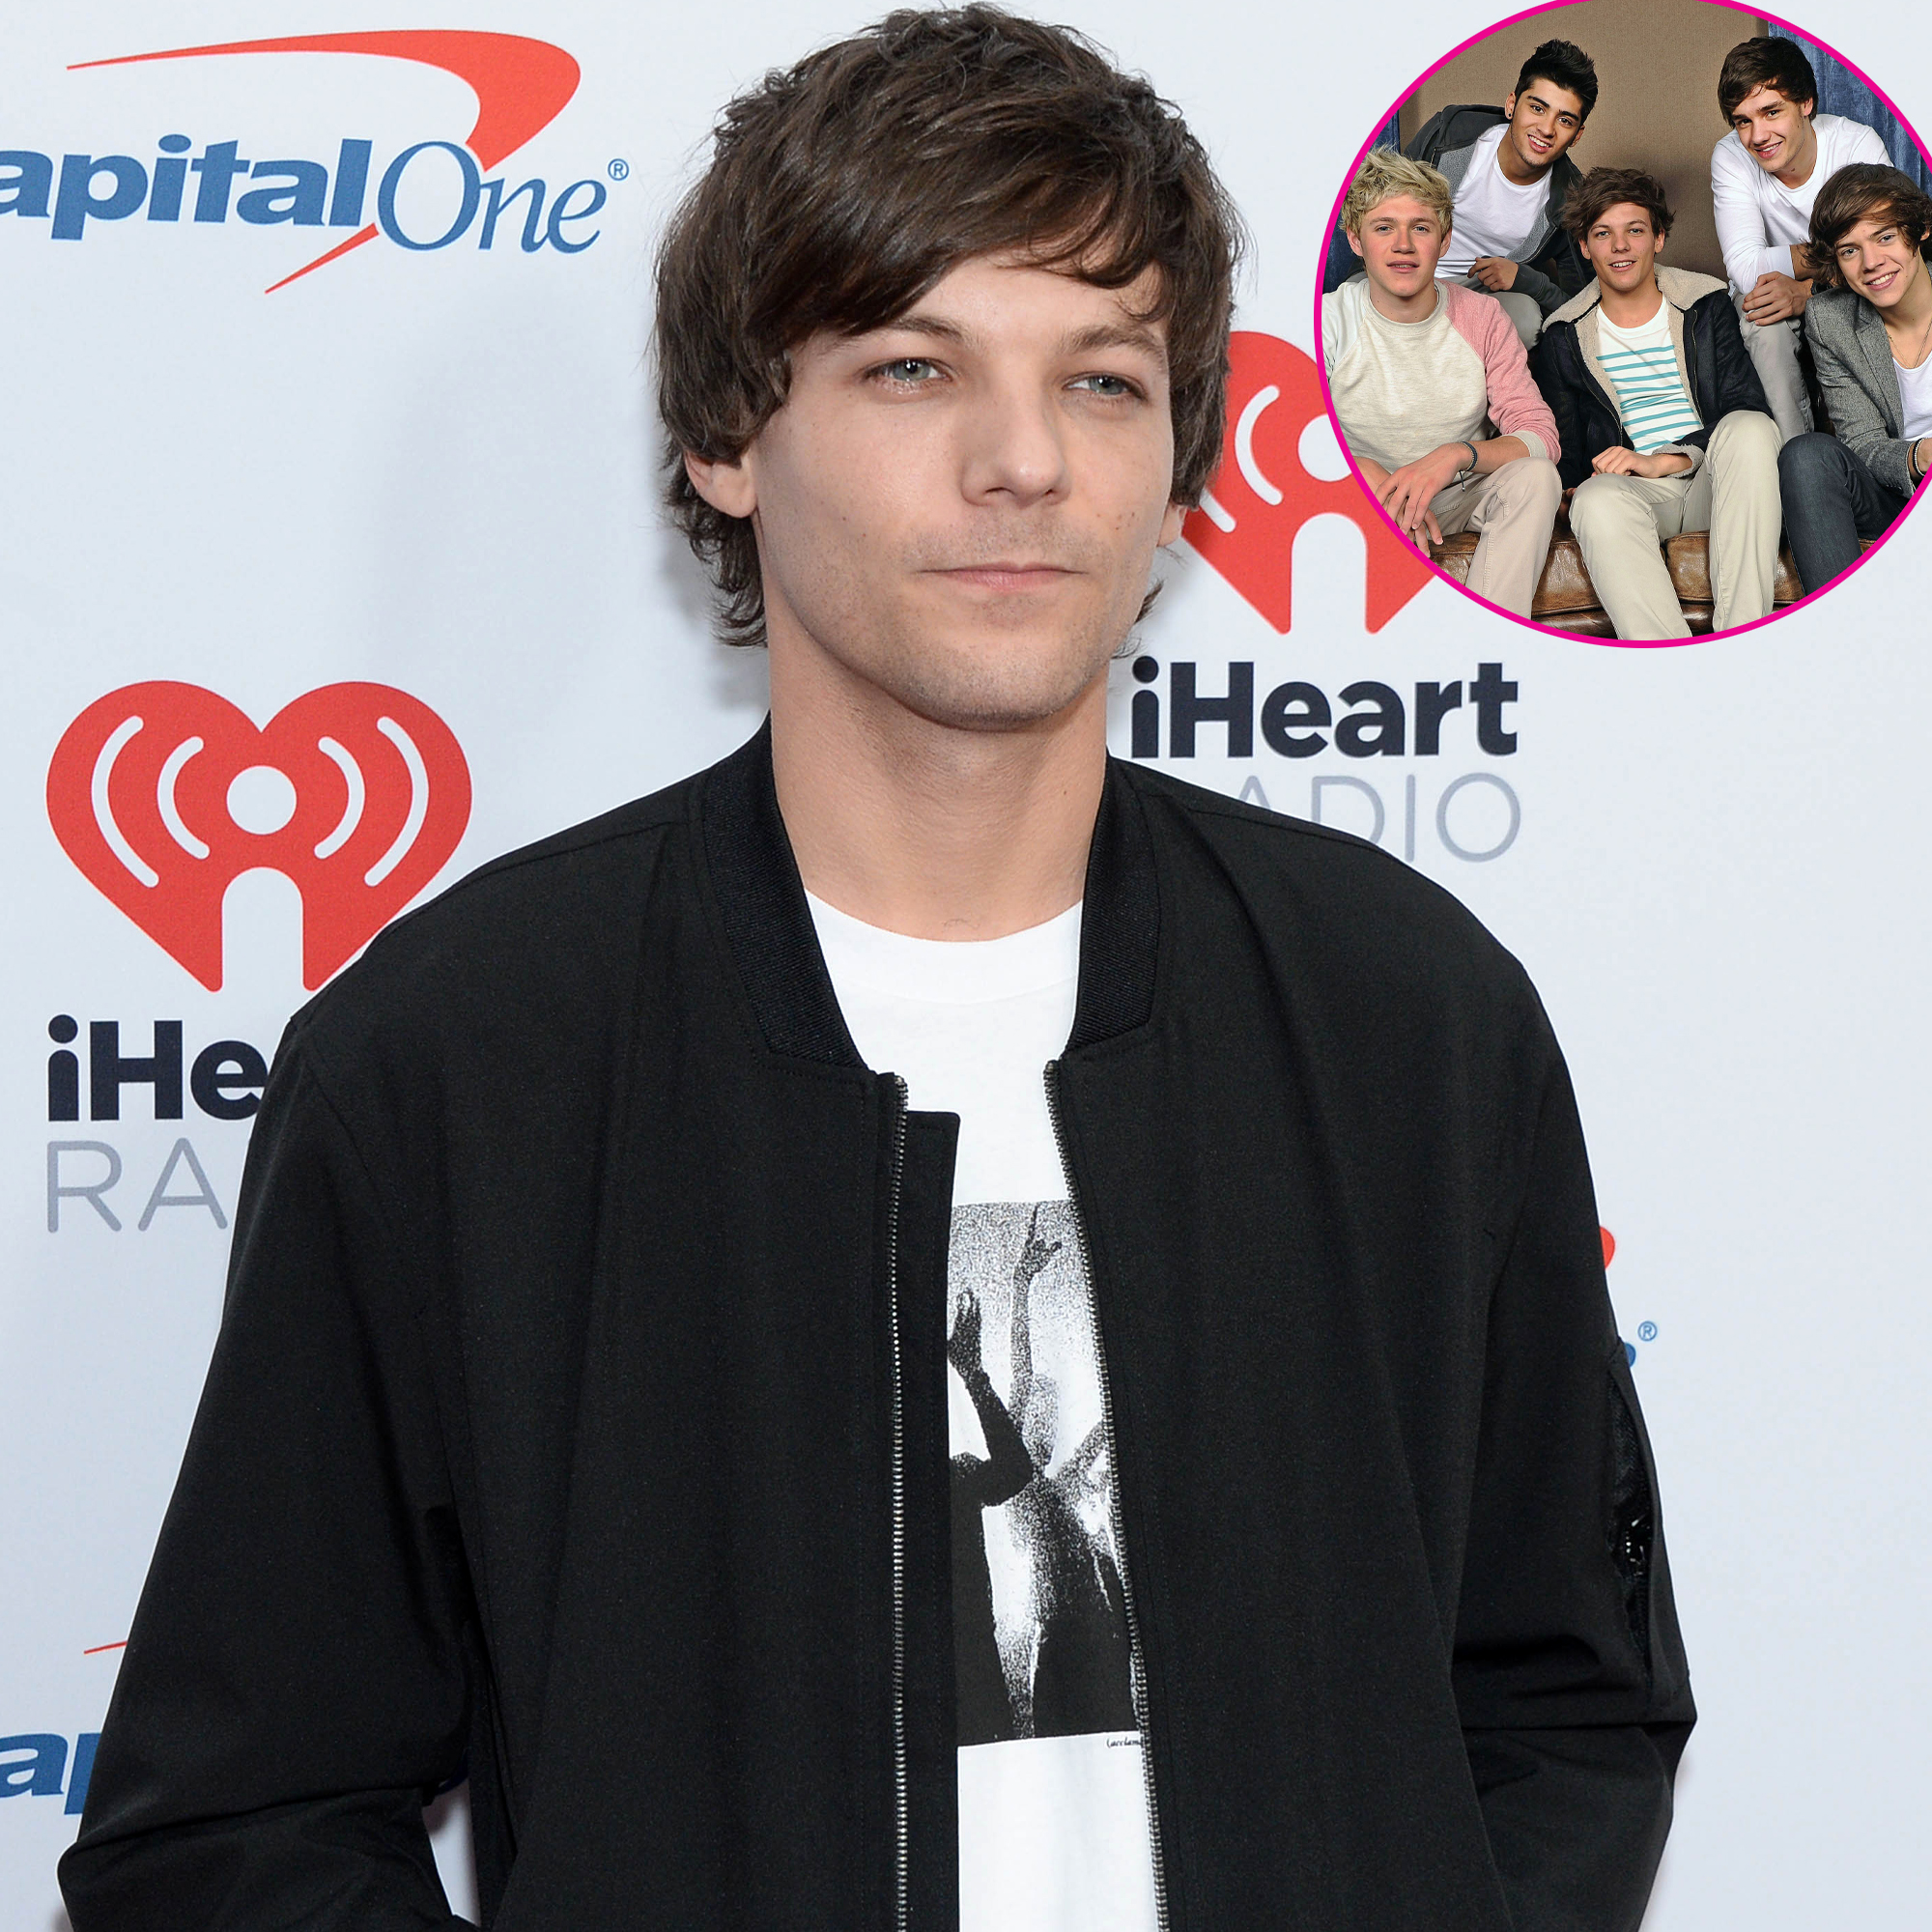 Louis Tomlinson 'We Made It' Interview: The Story Behind the New Single